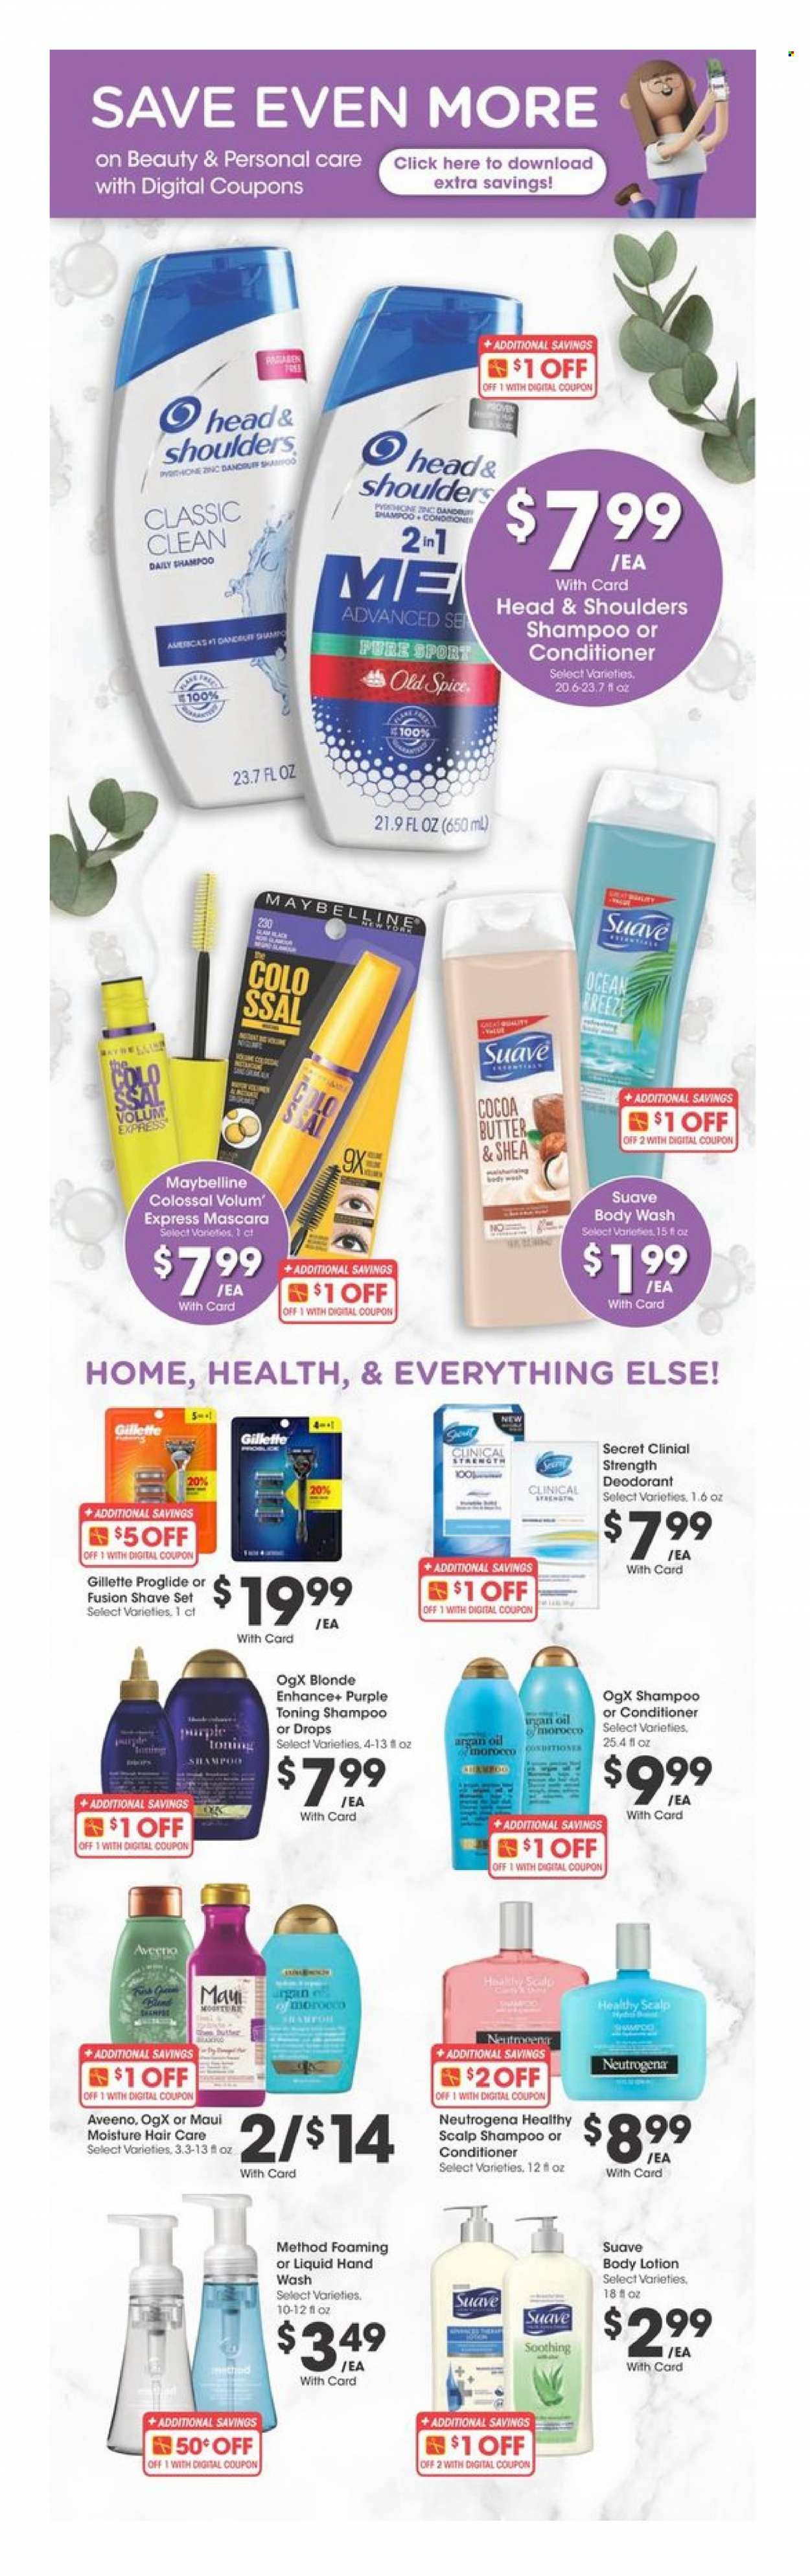 thumbnail - City Market Flyer - 12/07/2021 - 01/04/2022 - Sales products - spice, oil, Aveeno, body wash, shampoo, Suave, Old Spice, hand wash, Neutrogena, OGX, conditioner, Head & Shoulders, Maui Moisture, body lotion, anti-perspirant, deodorant, Gillette, mascara, Maybelline. Page 1.